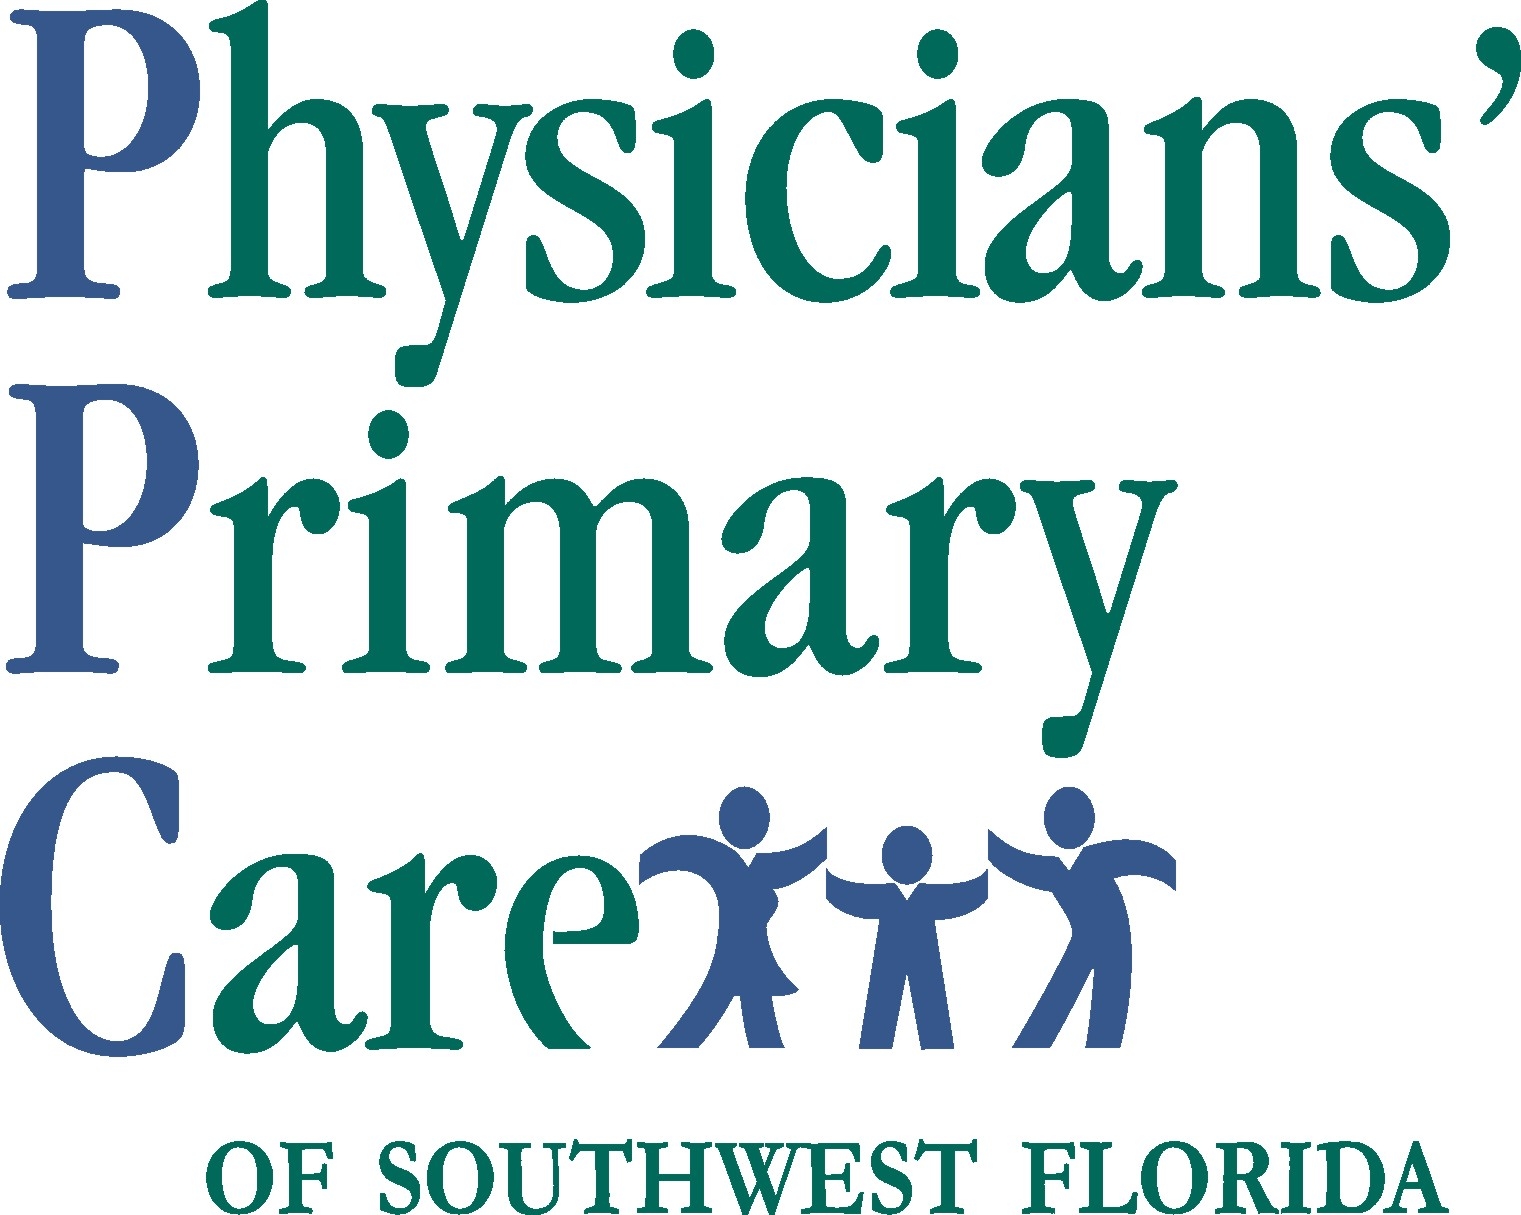 d. Physicians' Primary Care (Supporting)